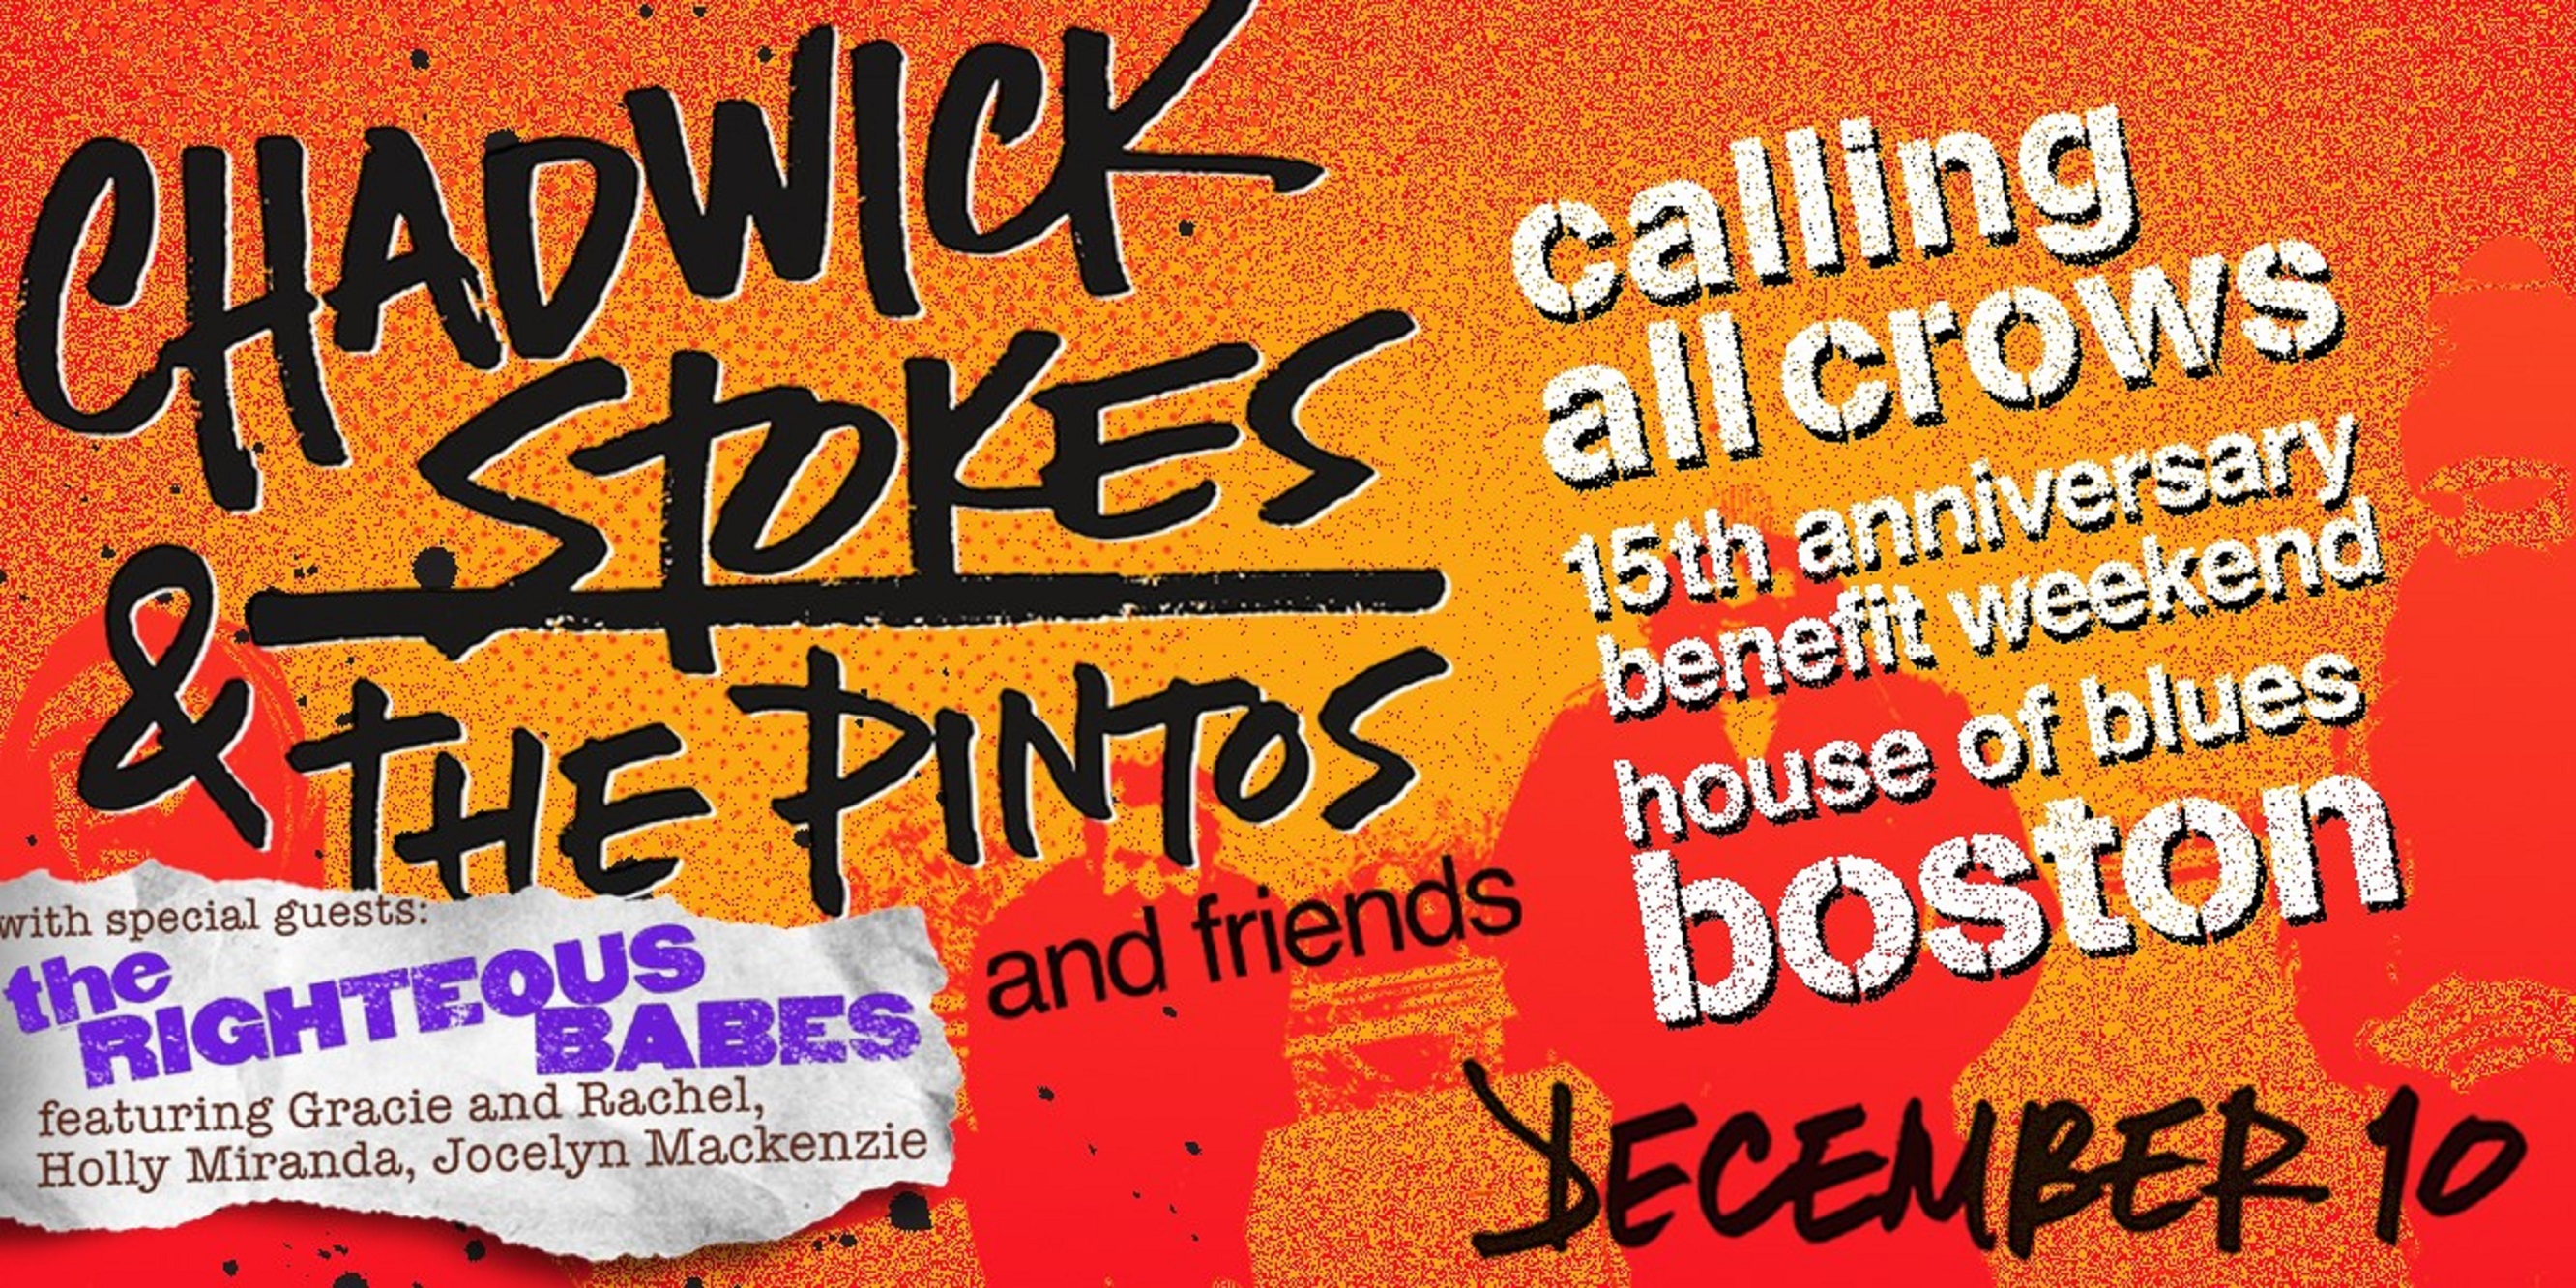 Righteous Babes Revue to join Chadwick Stokes & The Pintos for 15th annual Calling All Crows Benefit Concert December 10th at House of Blues Boston